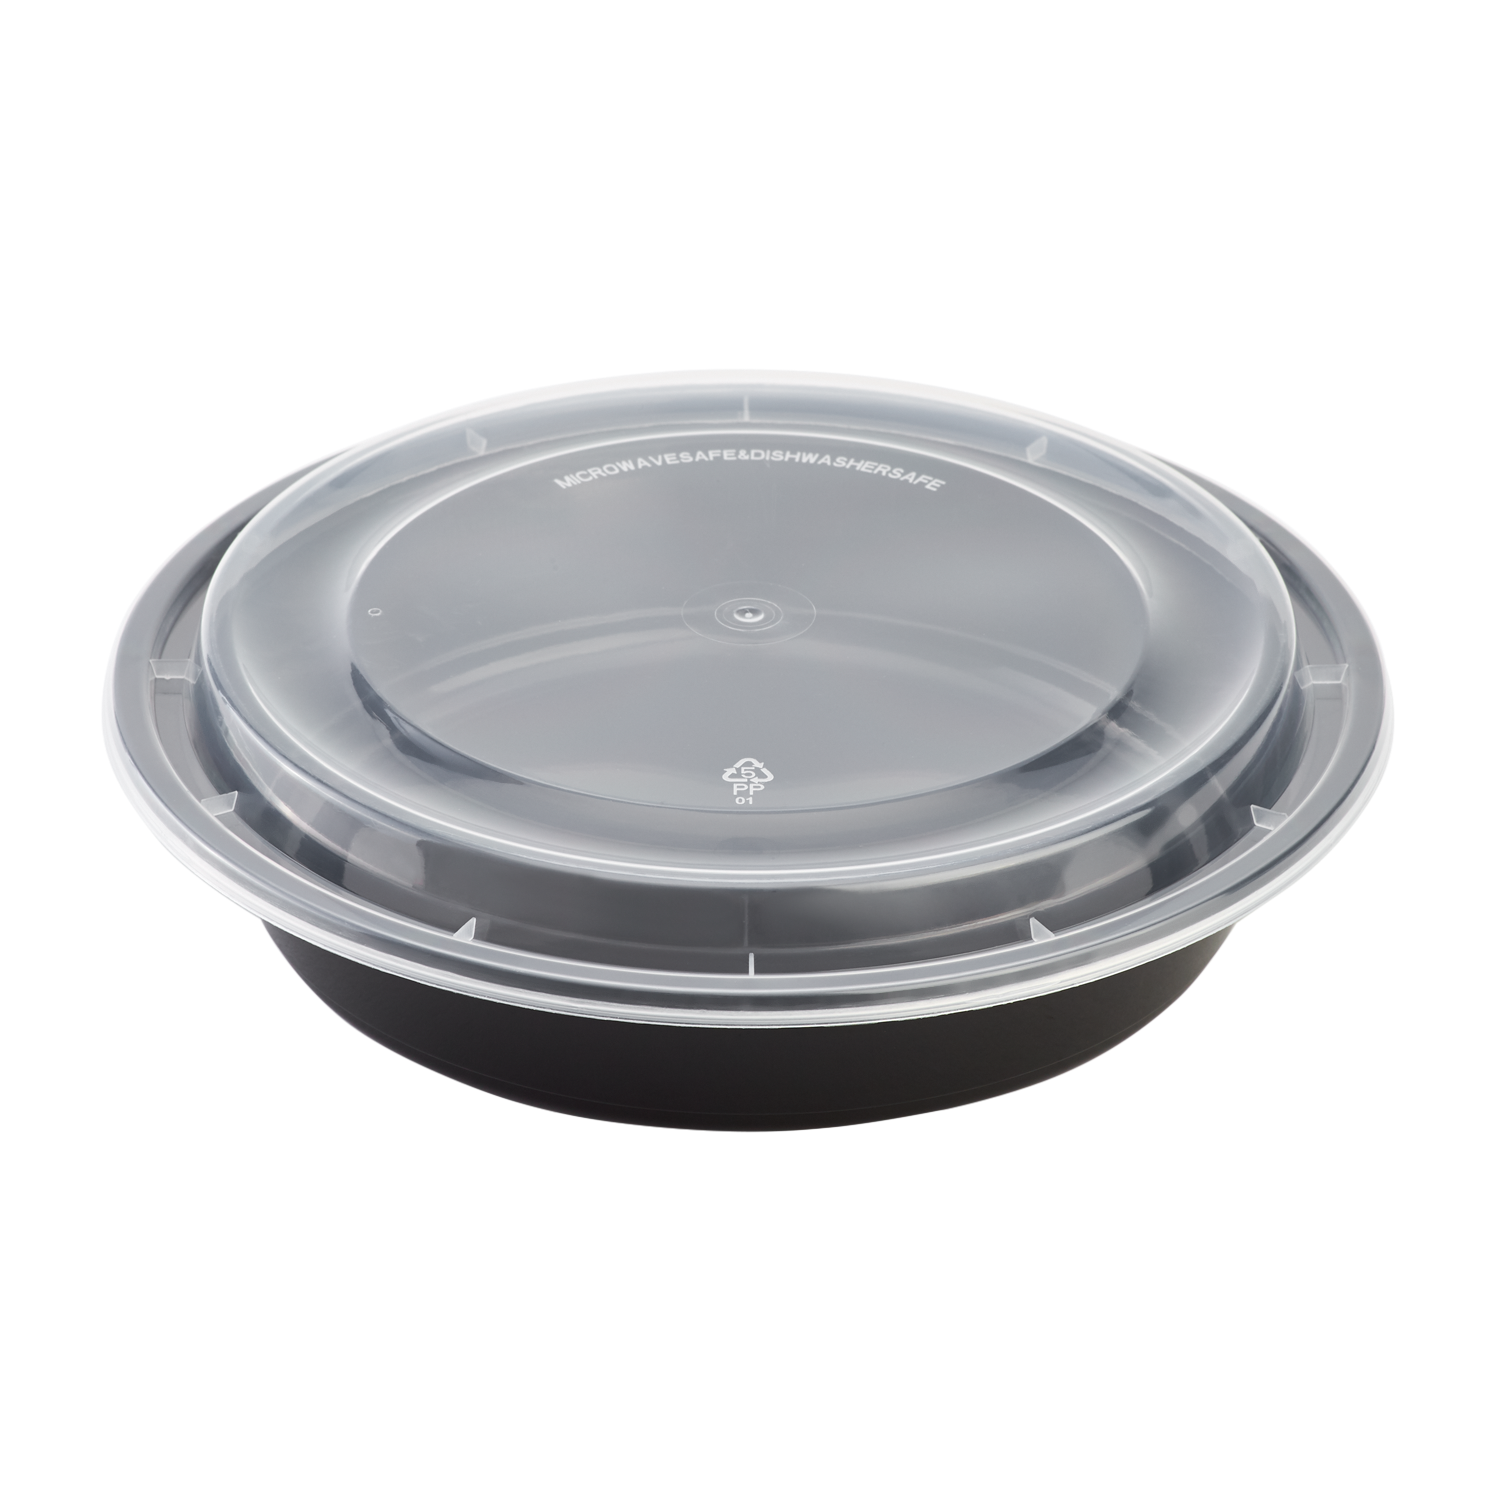 28 oz. Black Meal Prep Containers w/ Lid - 150/Case